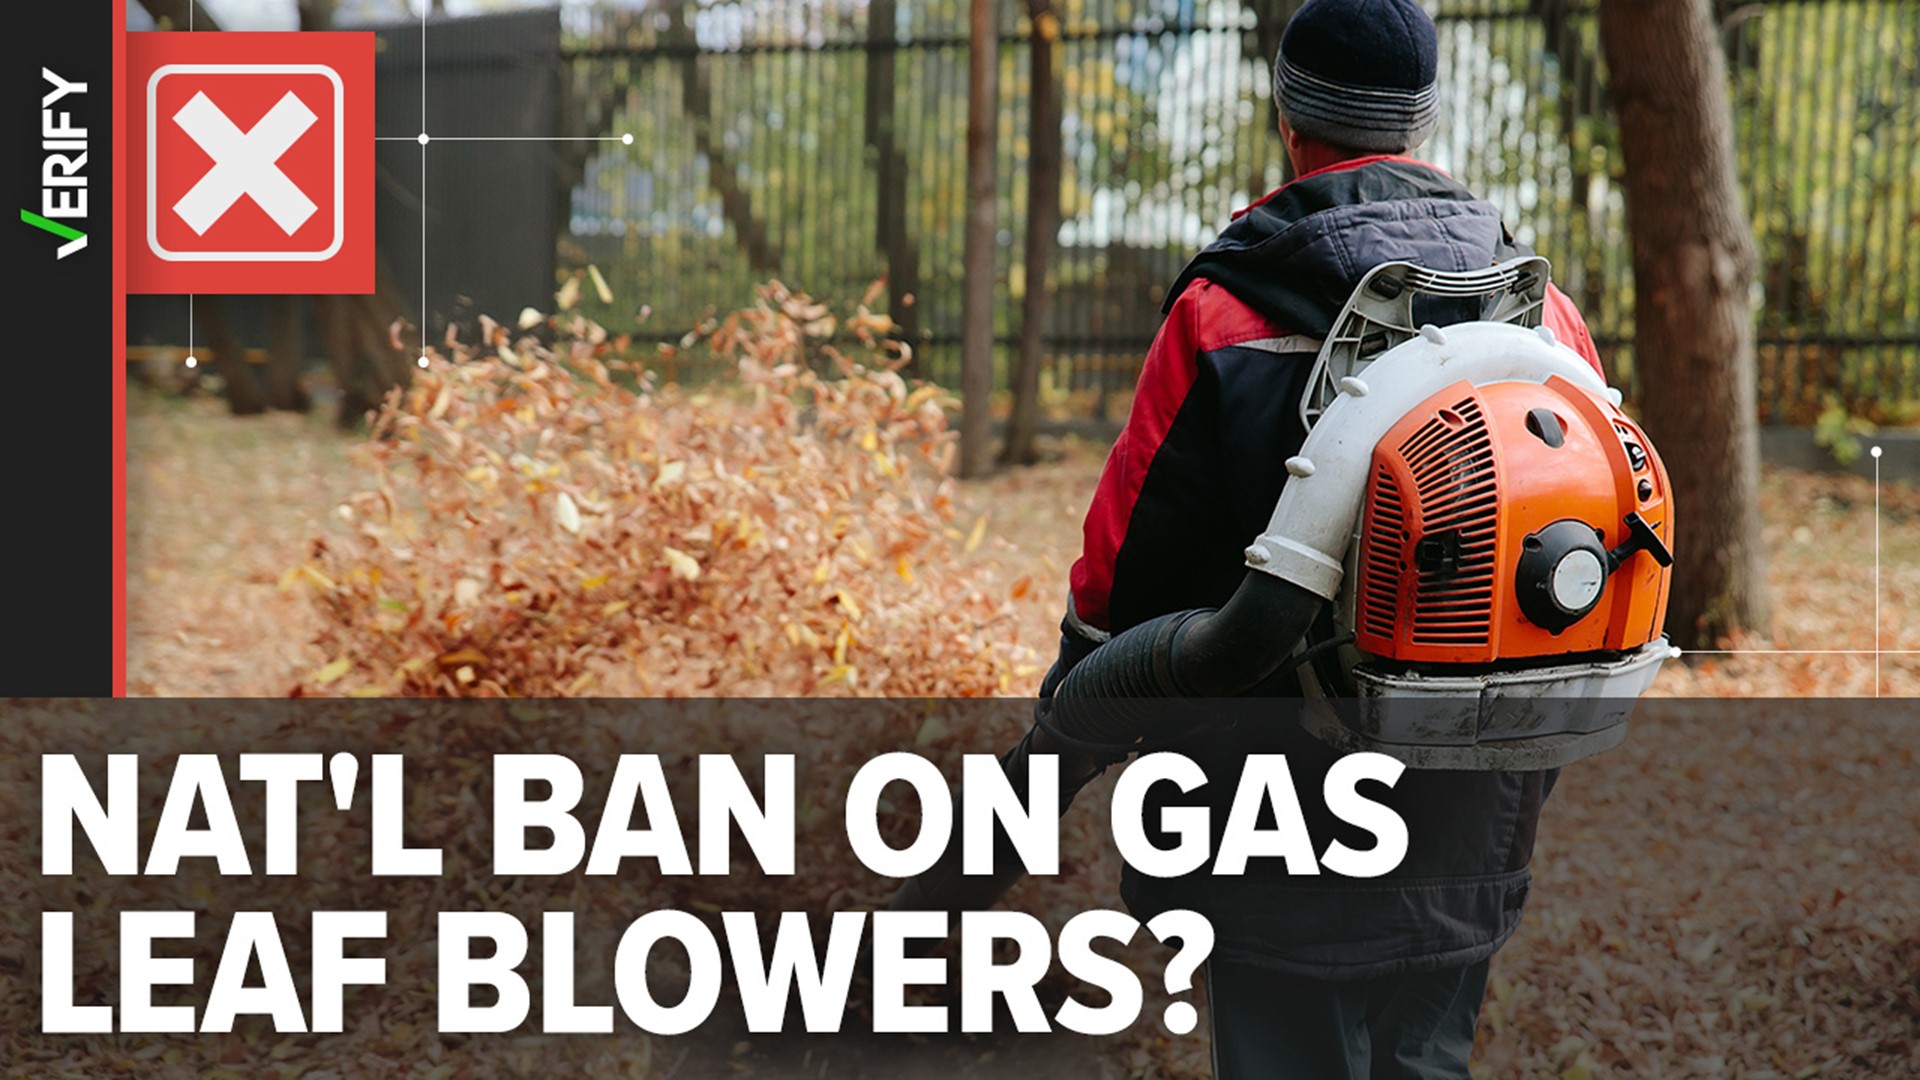 In most places, you can legally use a gas-powered leaf blower. But some states and cities have banned them, citing environmental concerns.